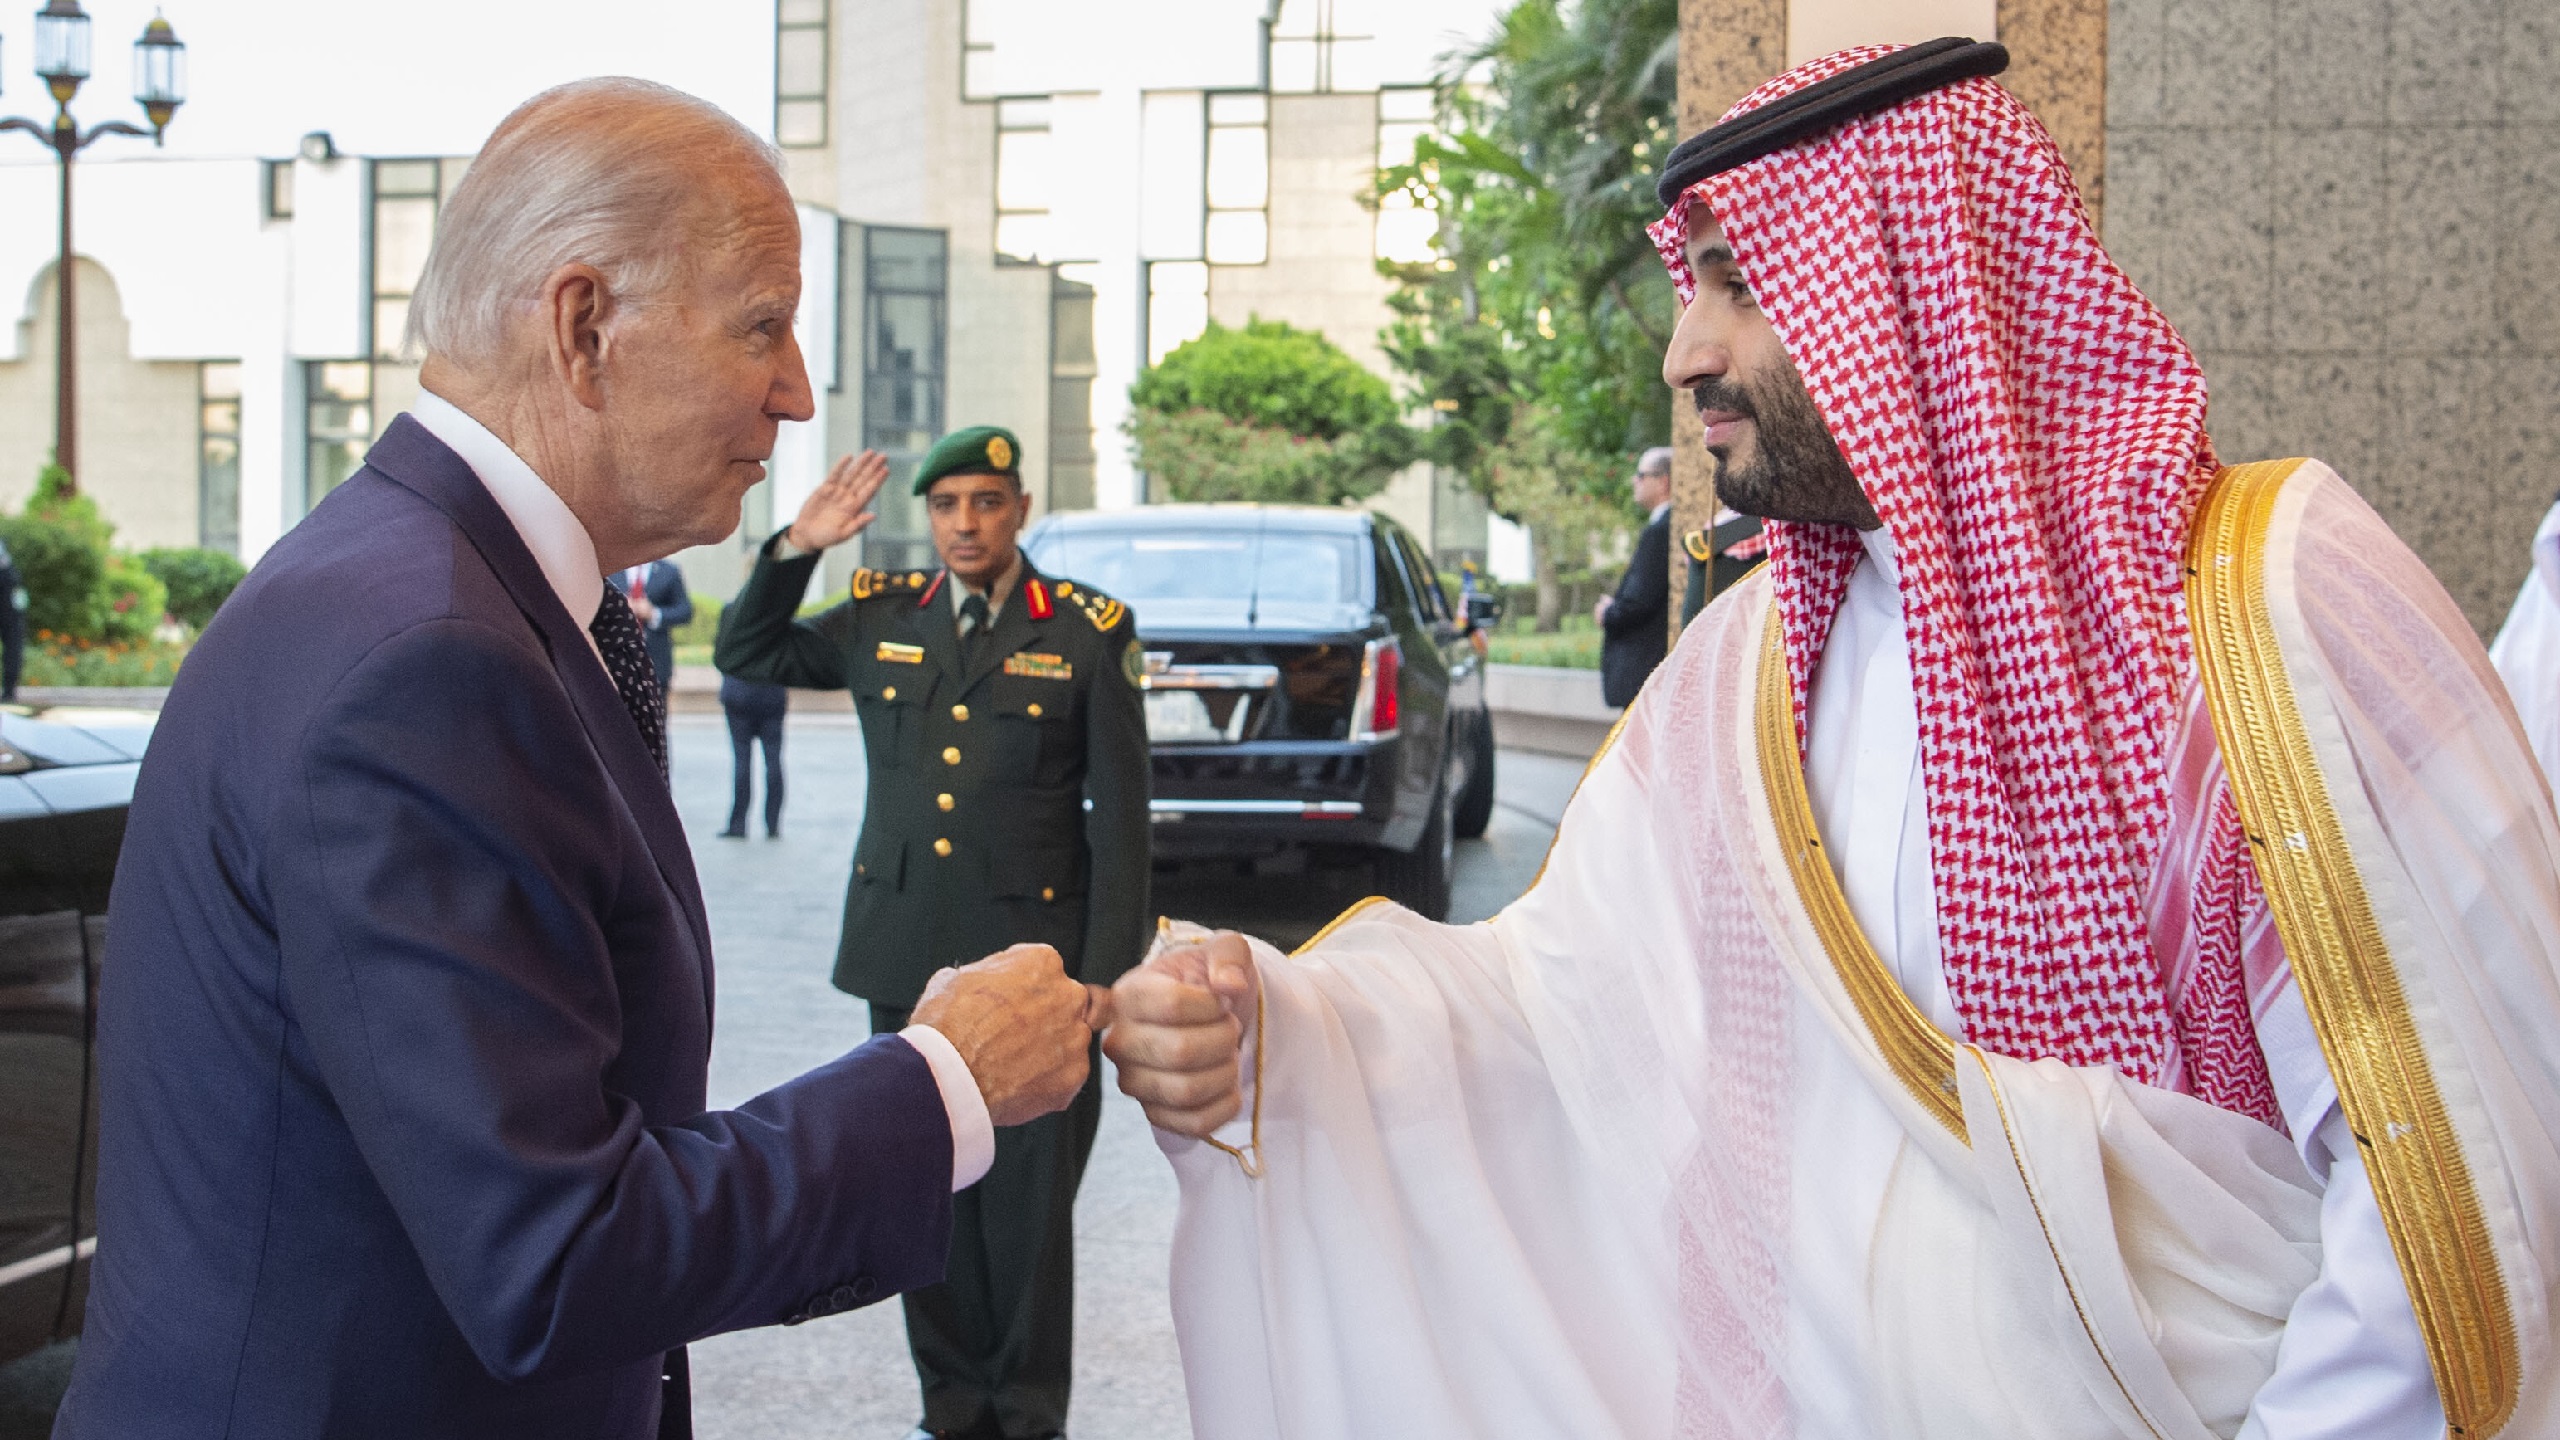 Biden’s Visit to the Arab World: Caution in Assessment and Expectations